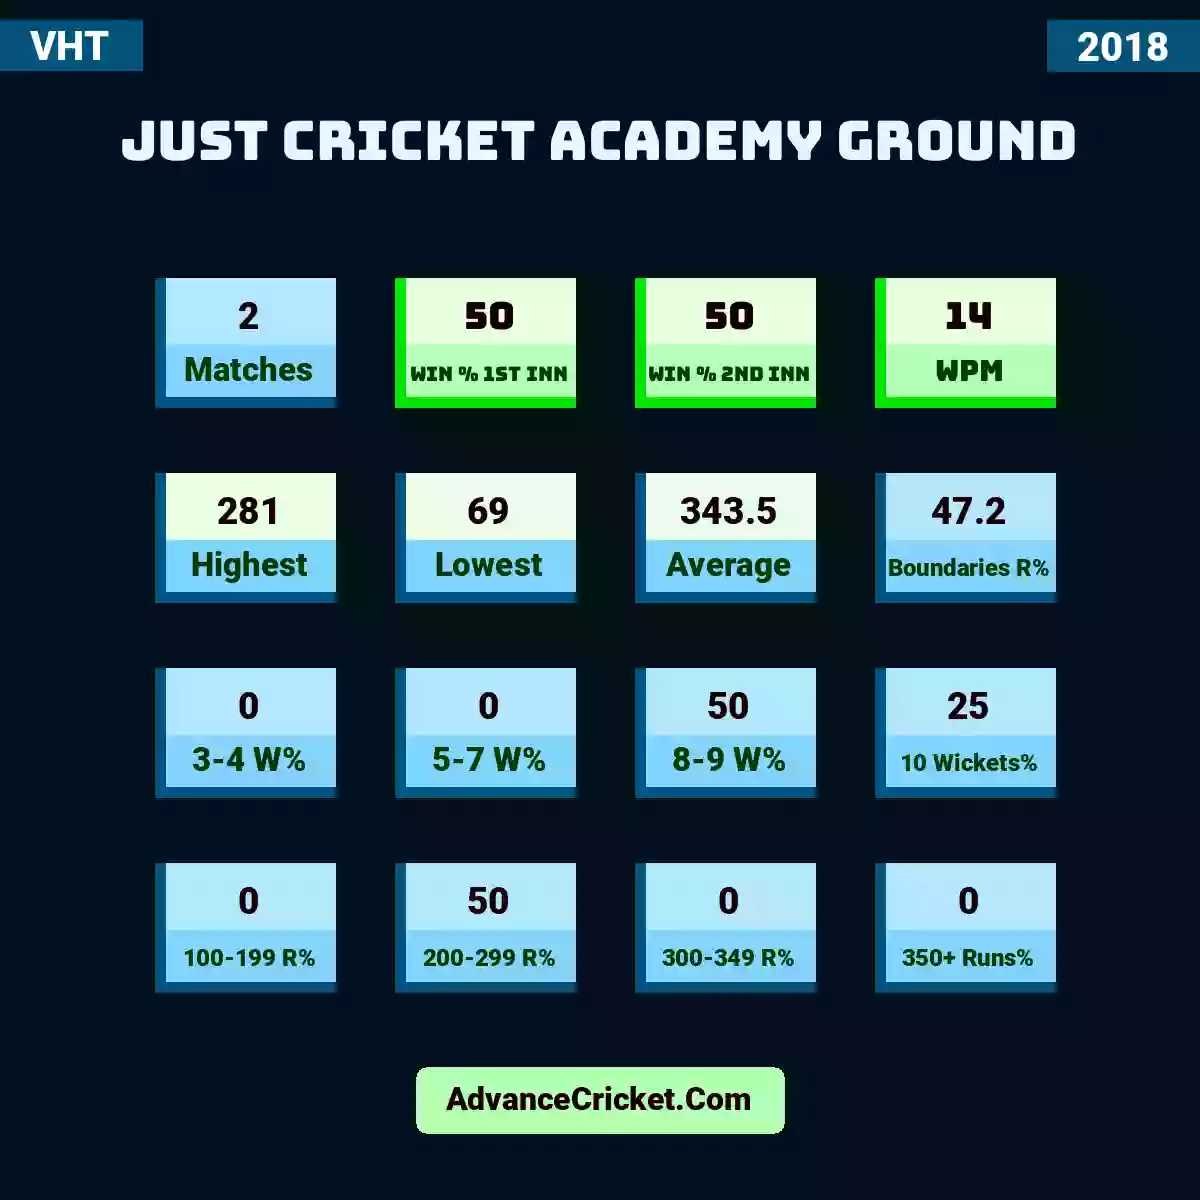 Image showing Just Cricket Academy Ground with Matches: 2, Win % 1st Inn: 50, Win % 2nd Inn: 50, WPM: 14, Highest: 281, Lowest: 69, Average: 343.5, Boundaries R%: 47.2, 3-4 W%: 0, 5-7 W%: 0, 8-9 W%: 50, 10 Wickets%: 25, 100-199 R%: 0, 200-299 R%: 50, 300-349 R%: 0, 350+ Runs%: 0.